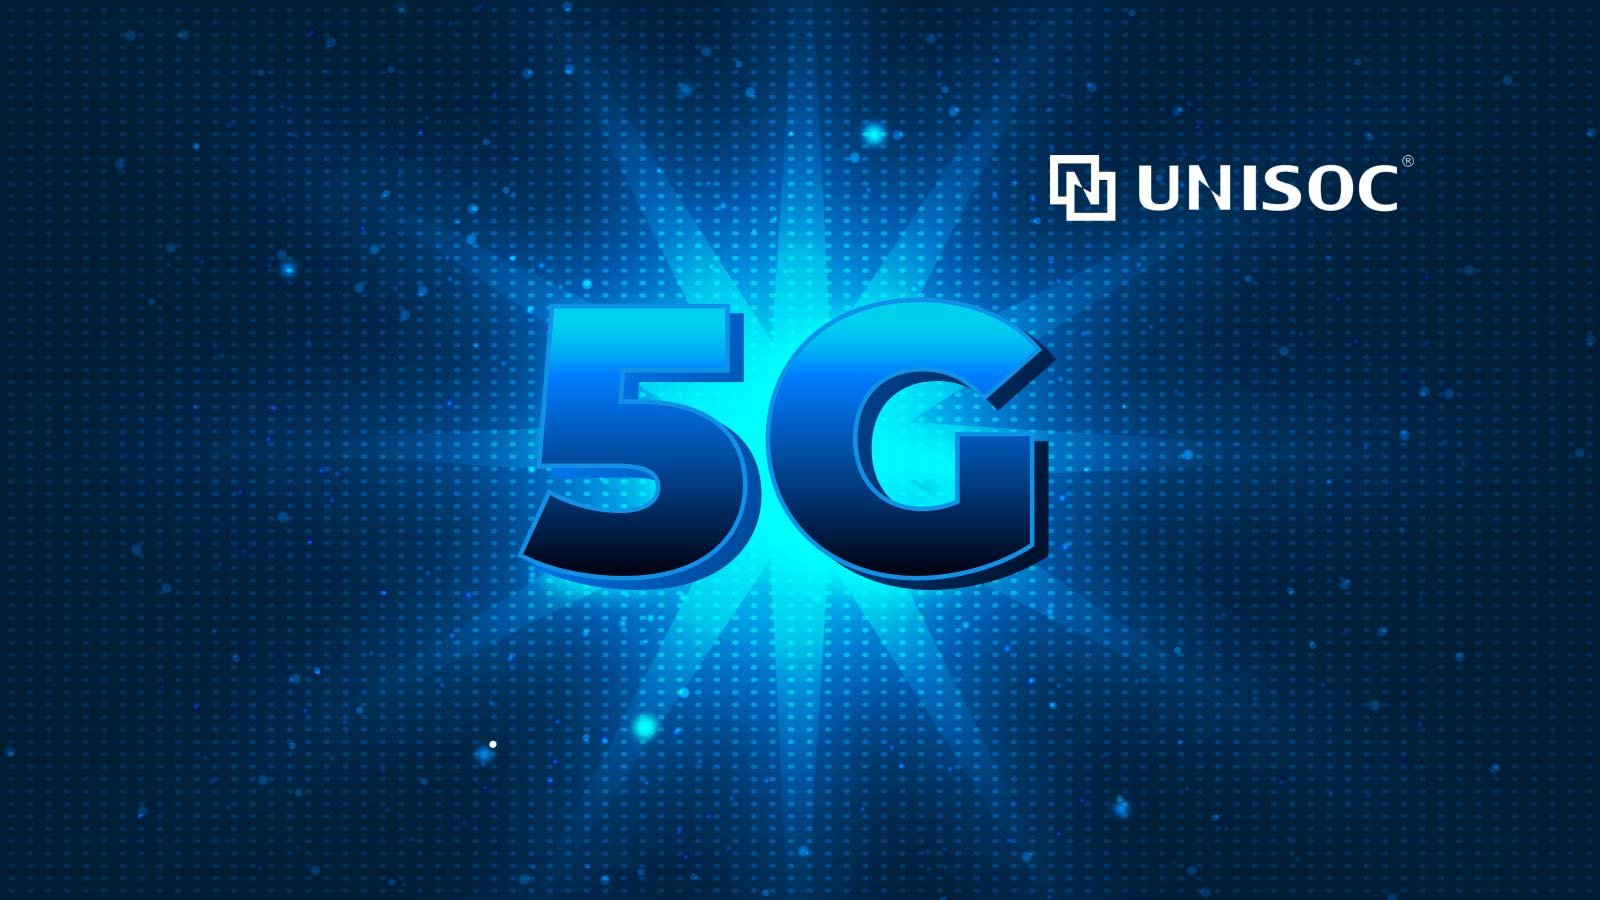 UniSoC T7520 is a 5G mobile processor with 6nm EUV | DroidAfrica